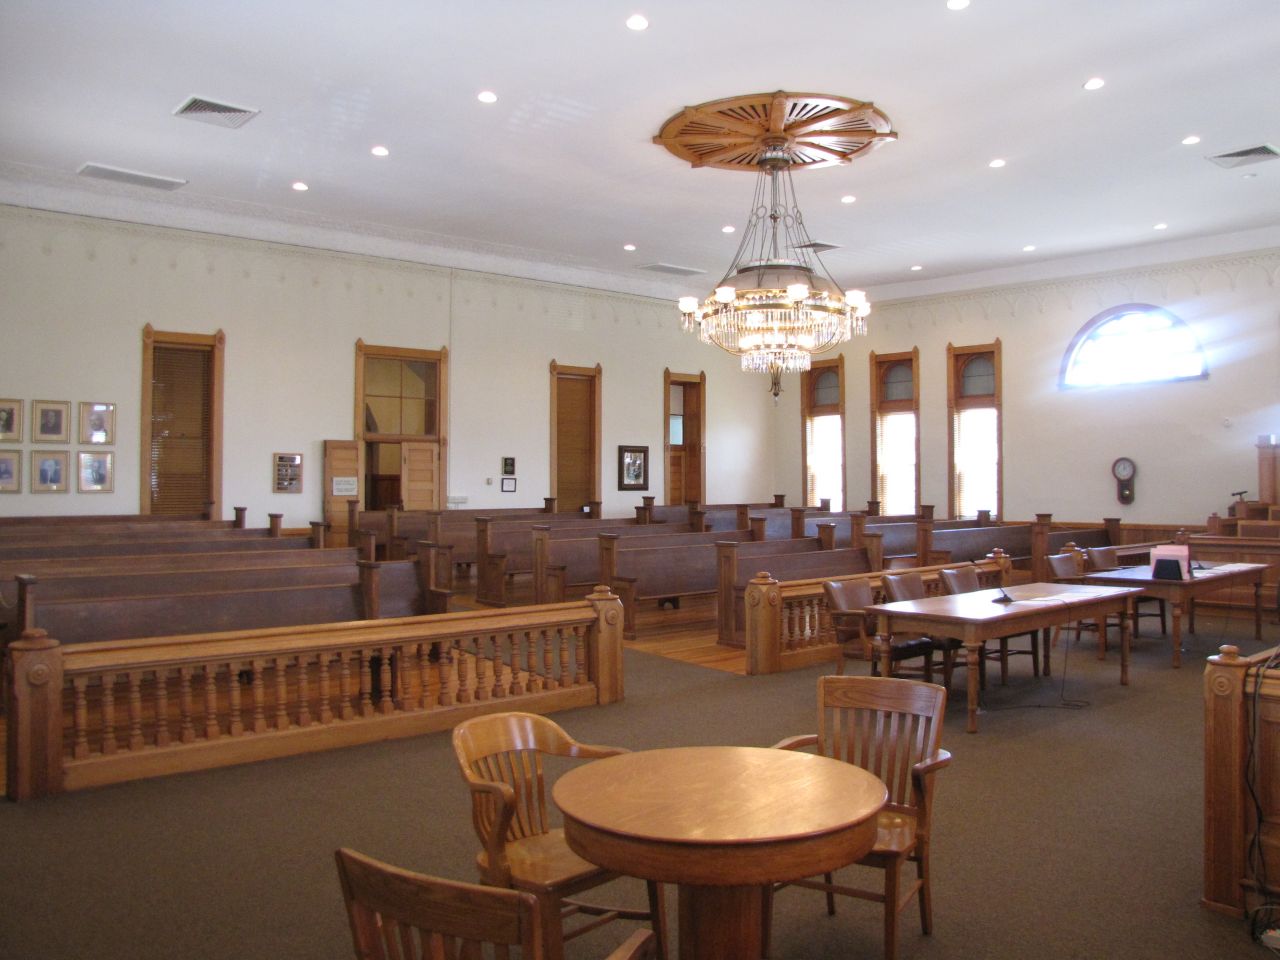 Another courtroom view